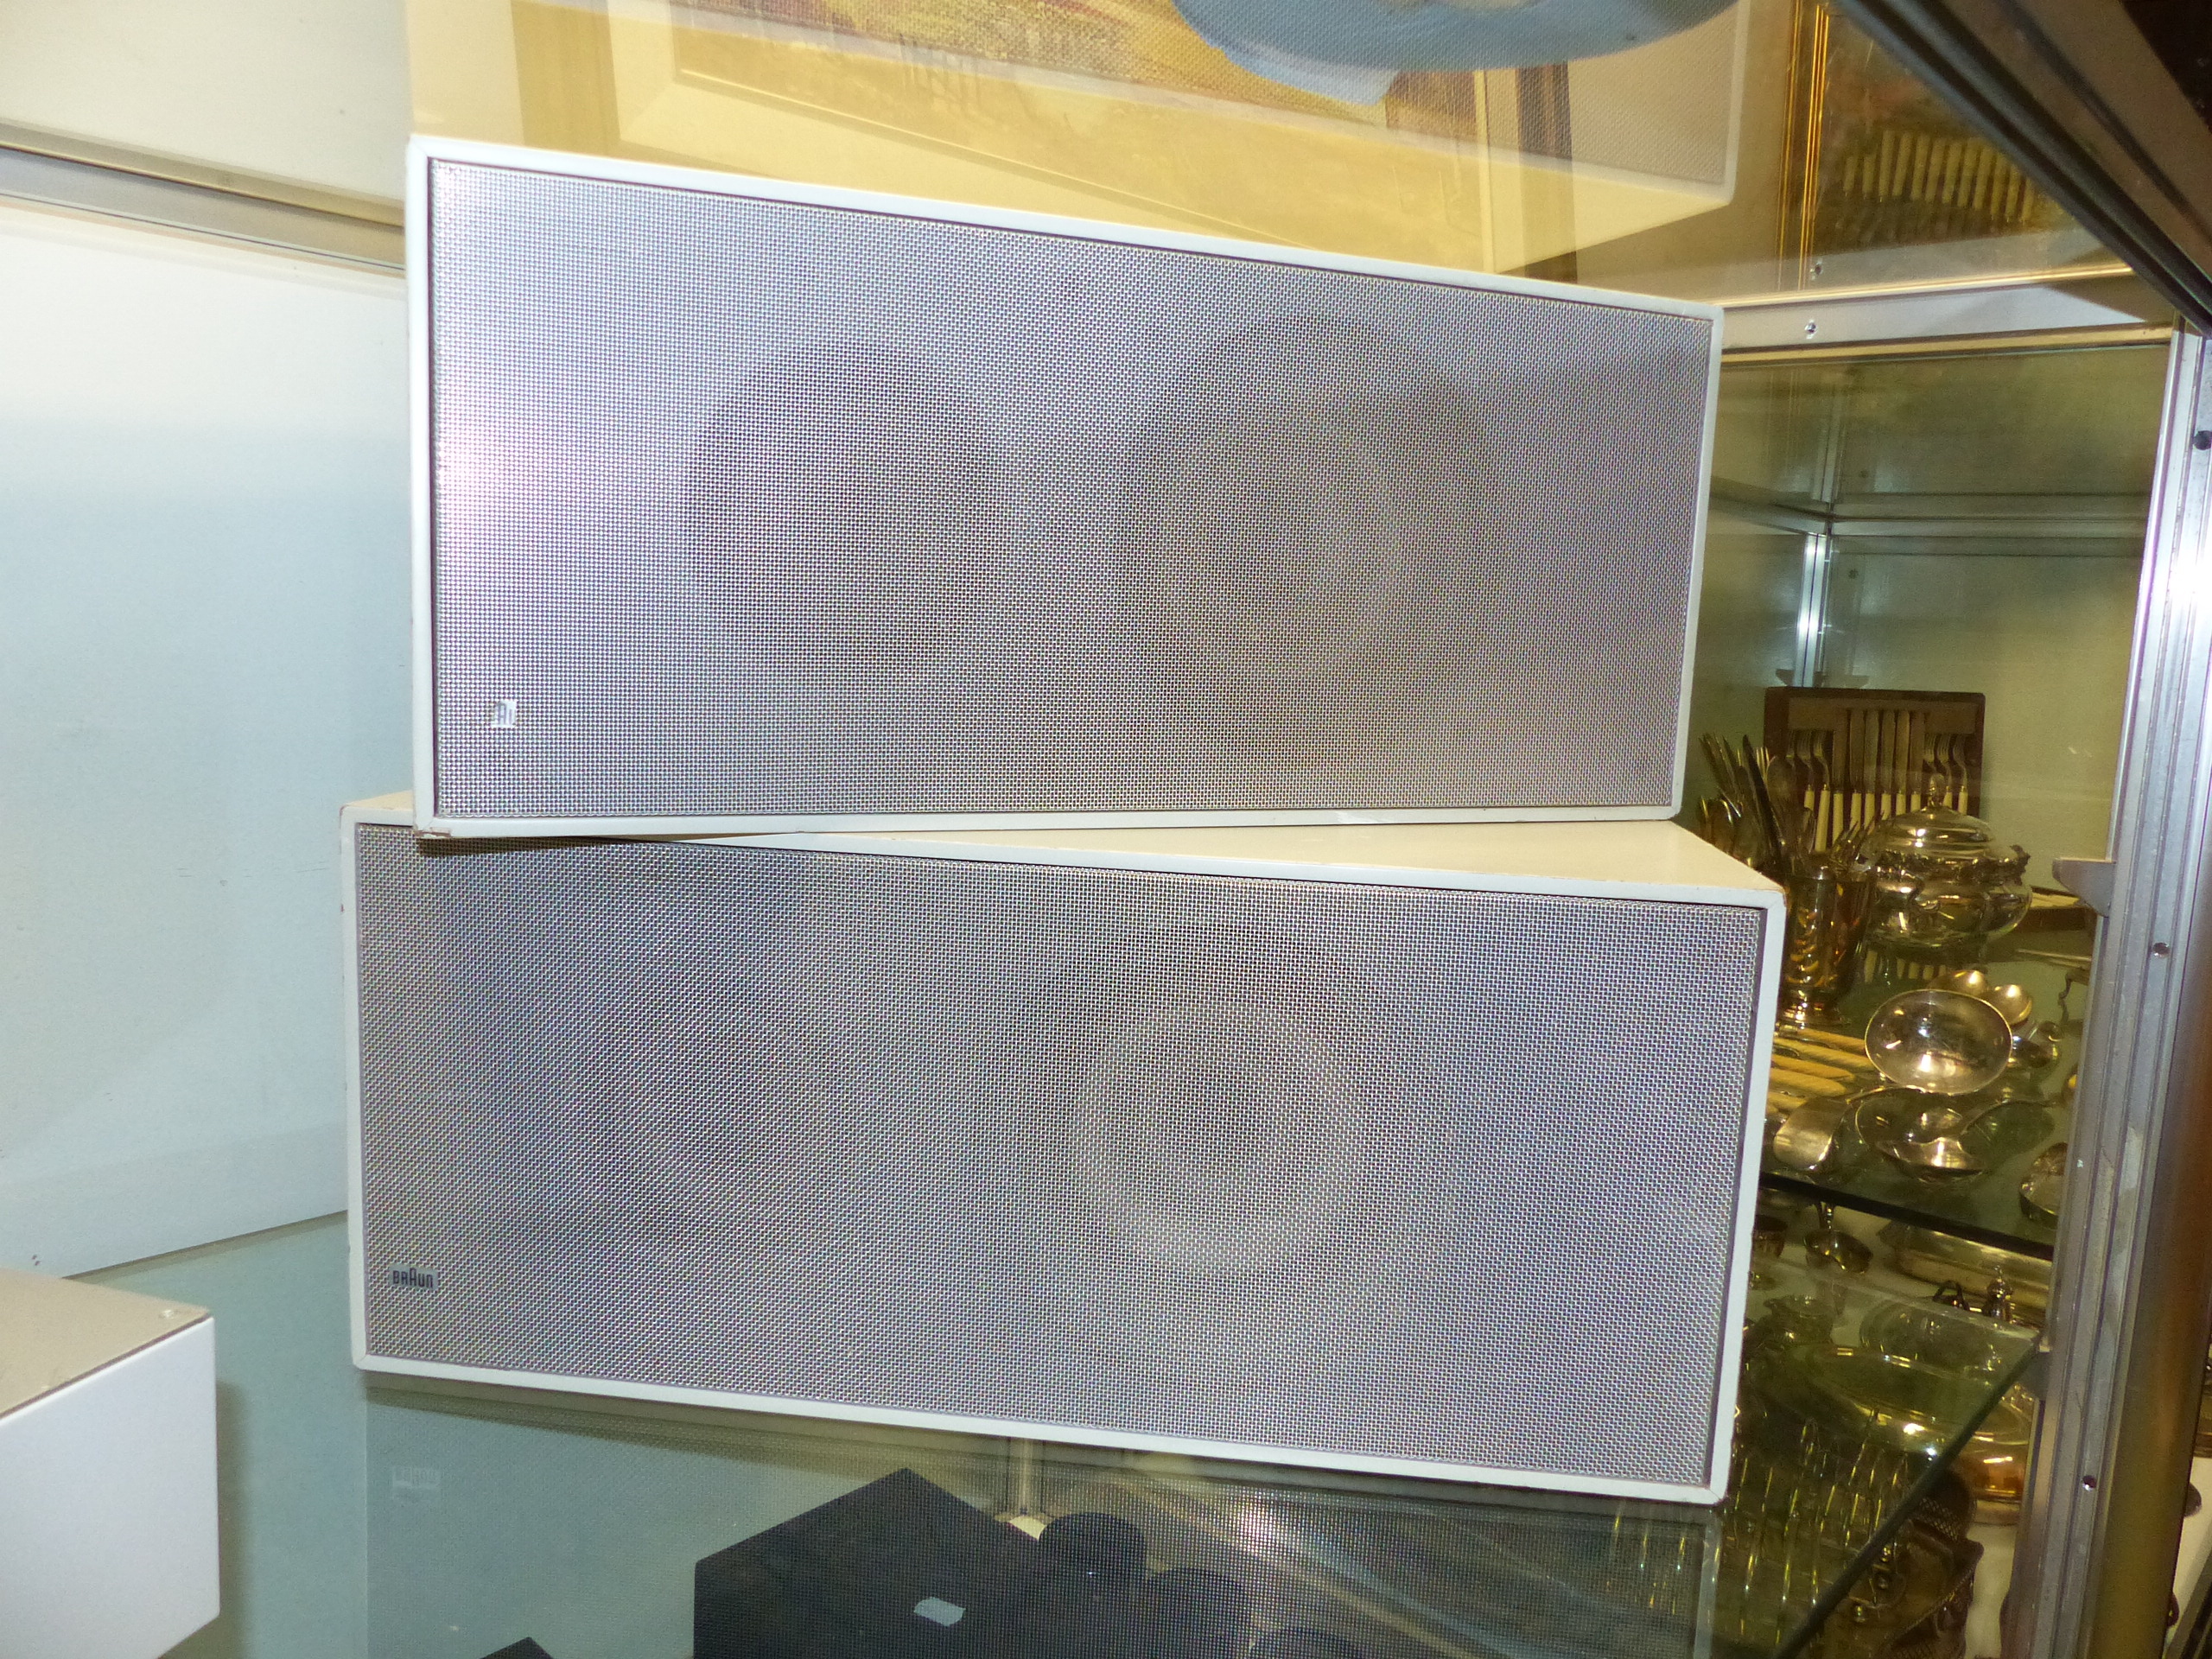 A RARE BRAUN AUDIO TC45 PHONO SUPER STEREO SYSTEM DESIGNED BY DIETER RAMS c.1965 FITTED WITH SME - Image 2 of 5